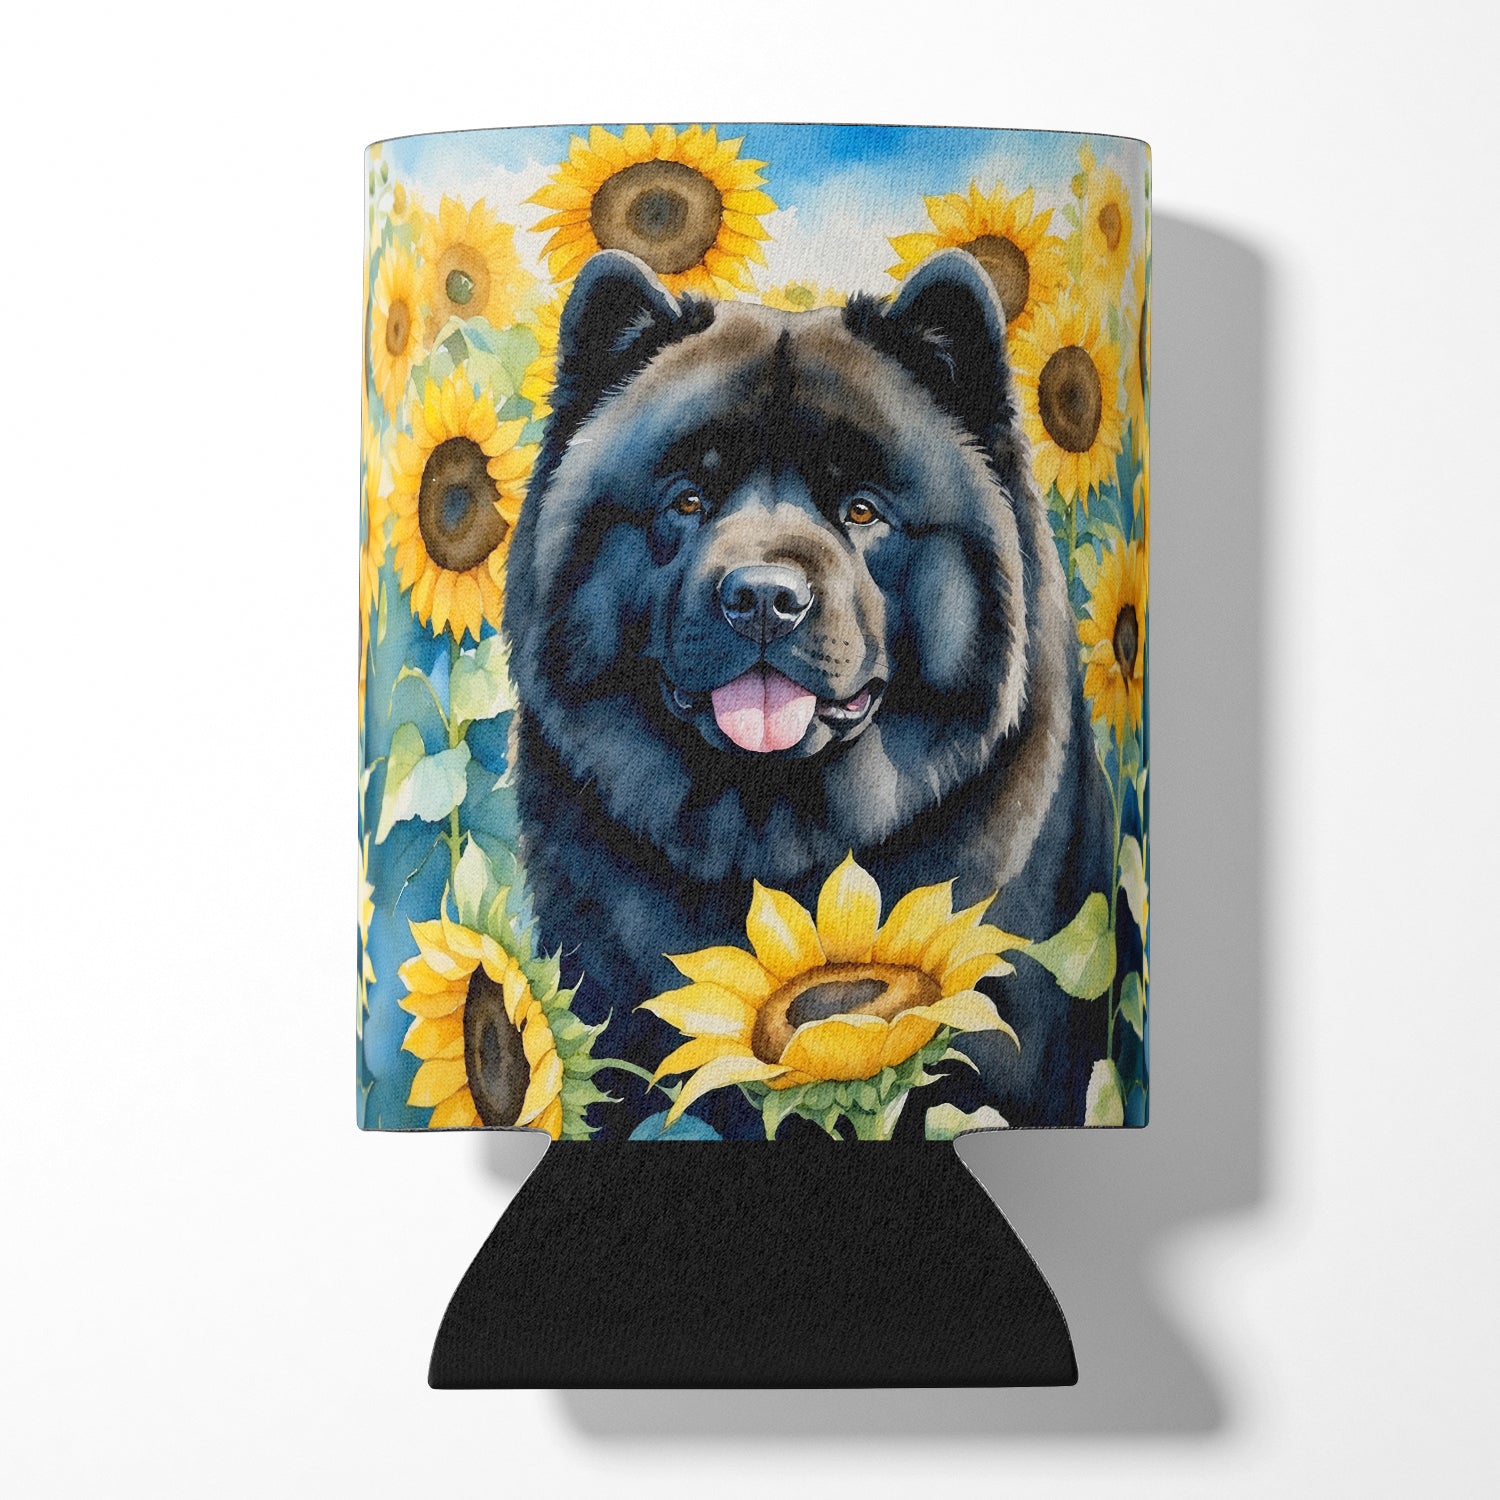 Buy this Chow Chow in Sunflowers Can or Bottle Hugger